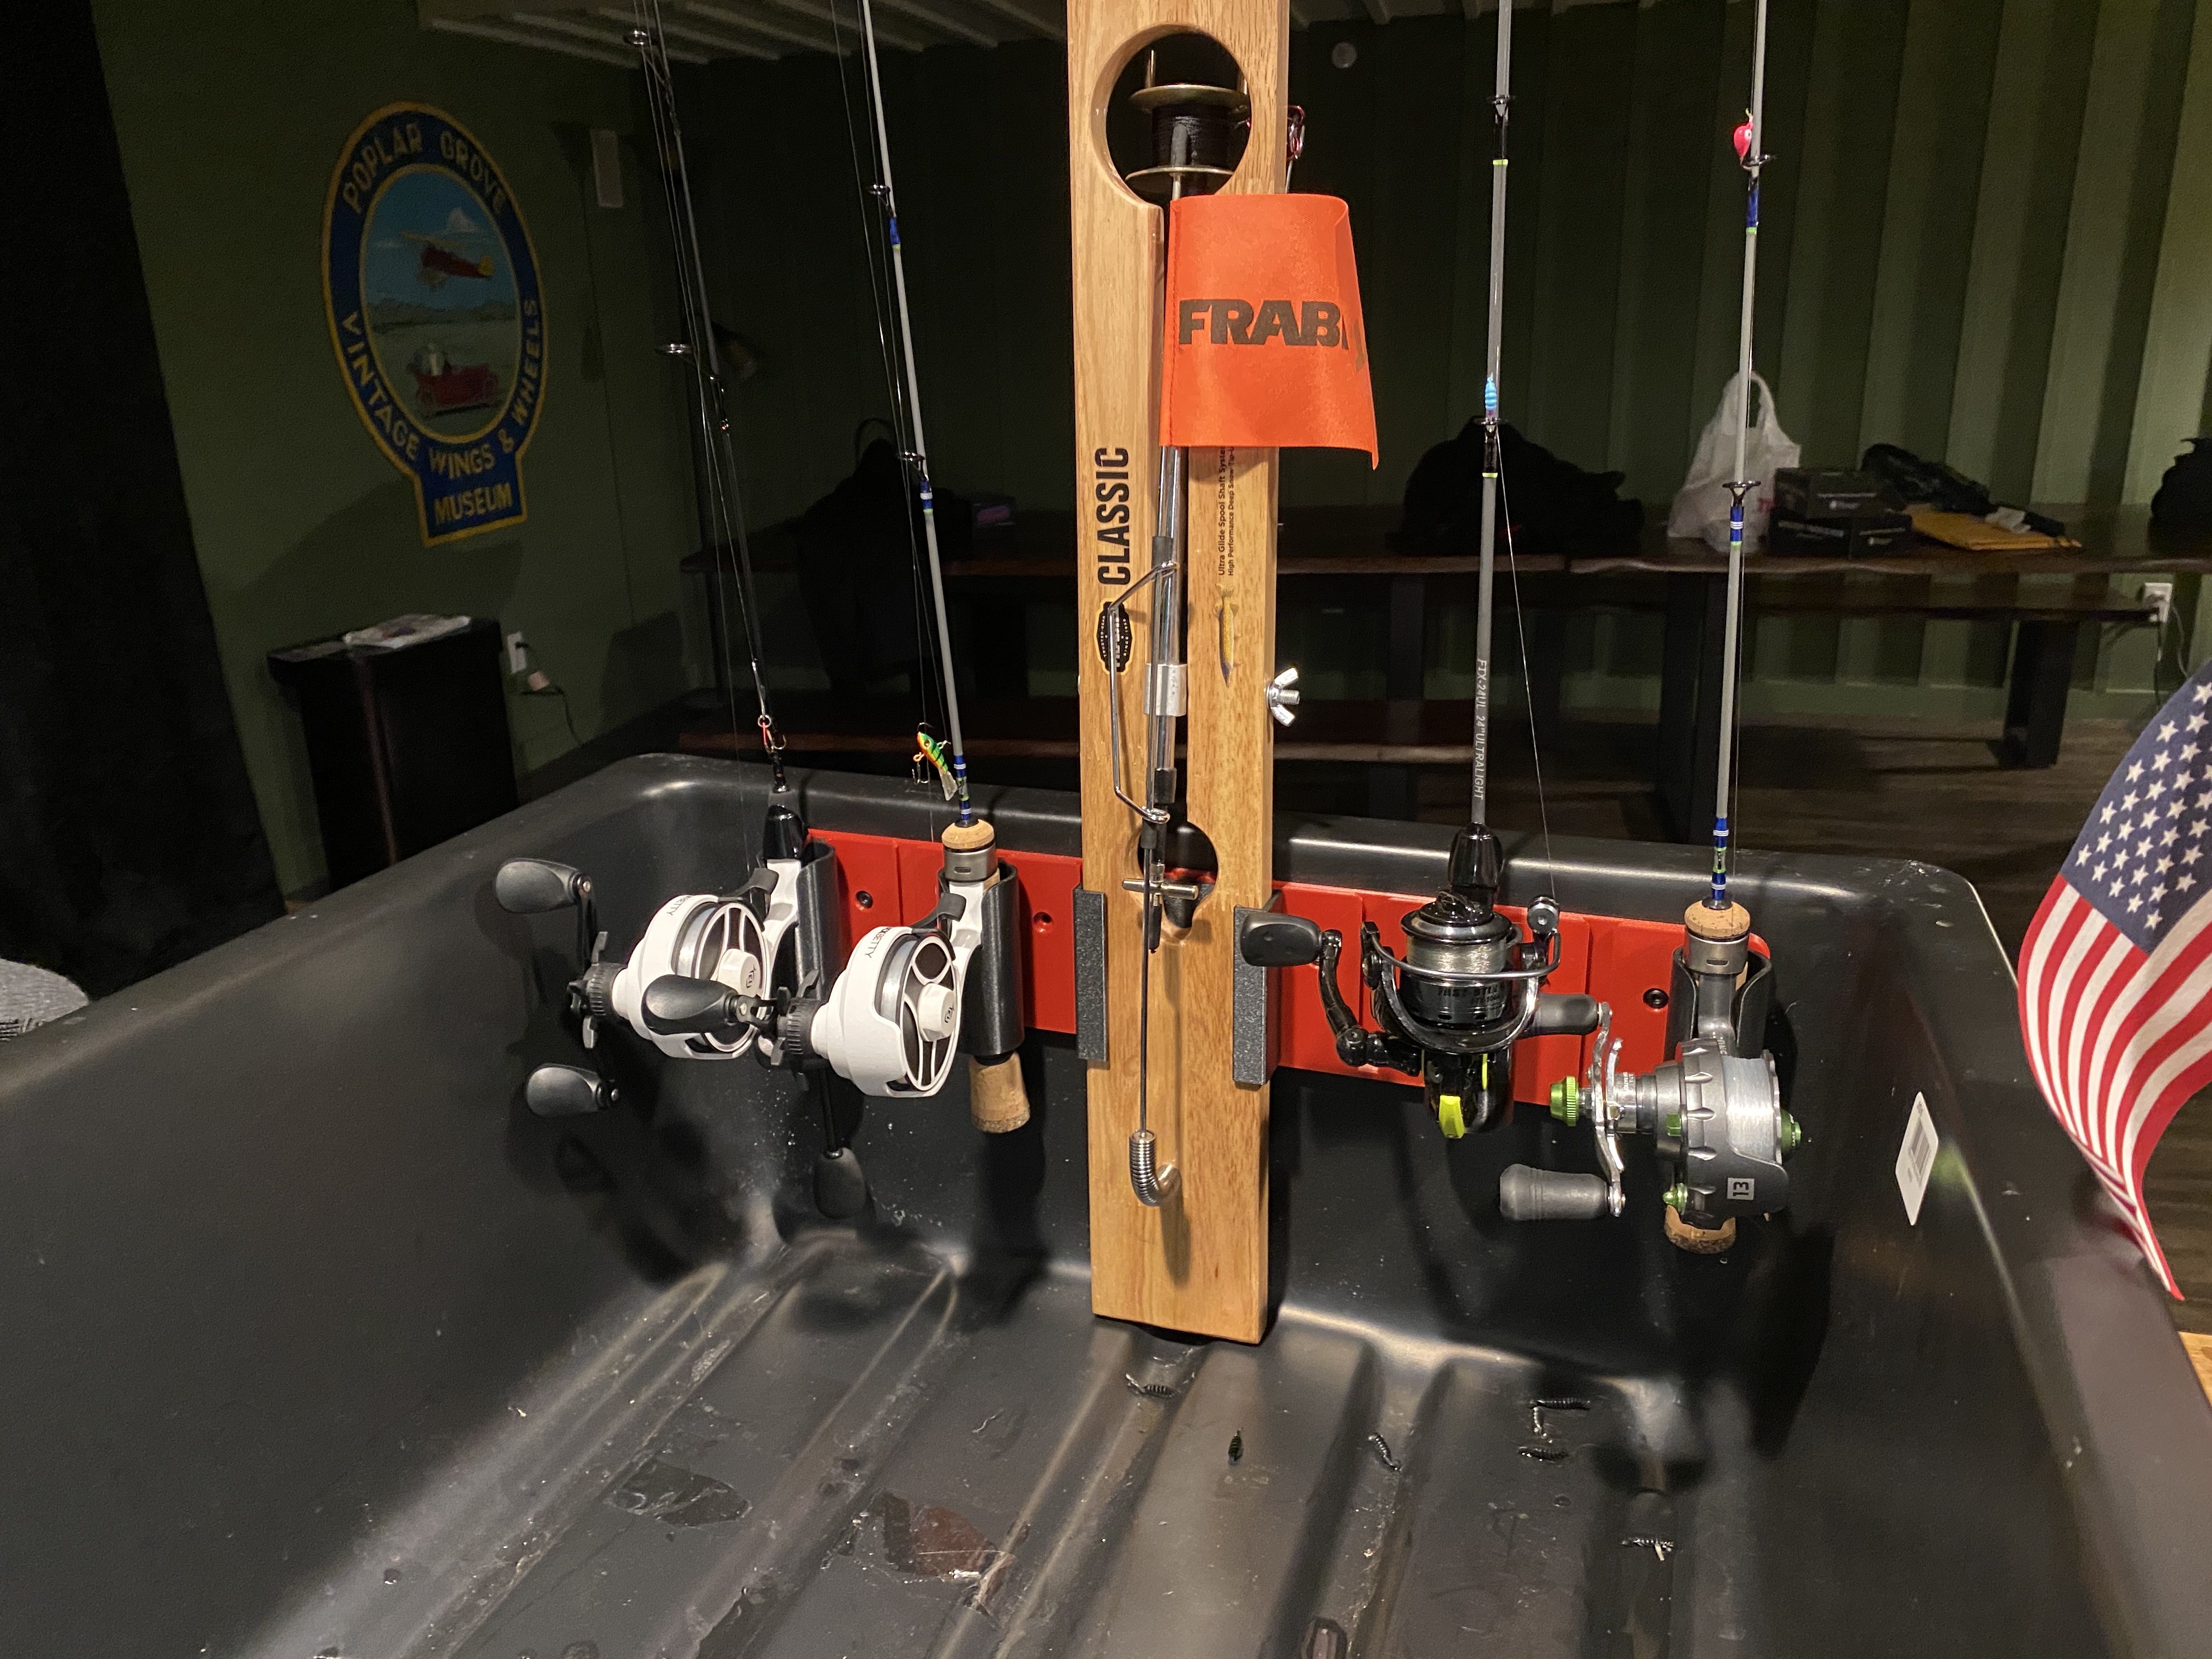 Ice Fishing Rod Holder by Mike, Download free STL model